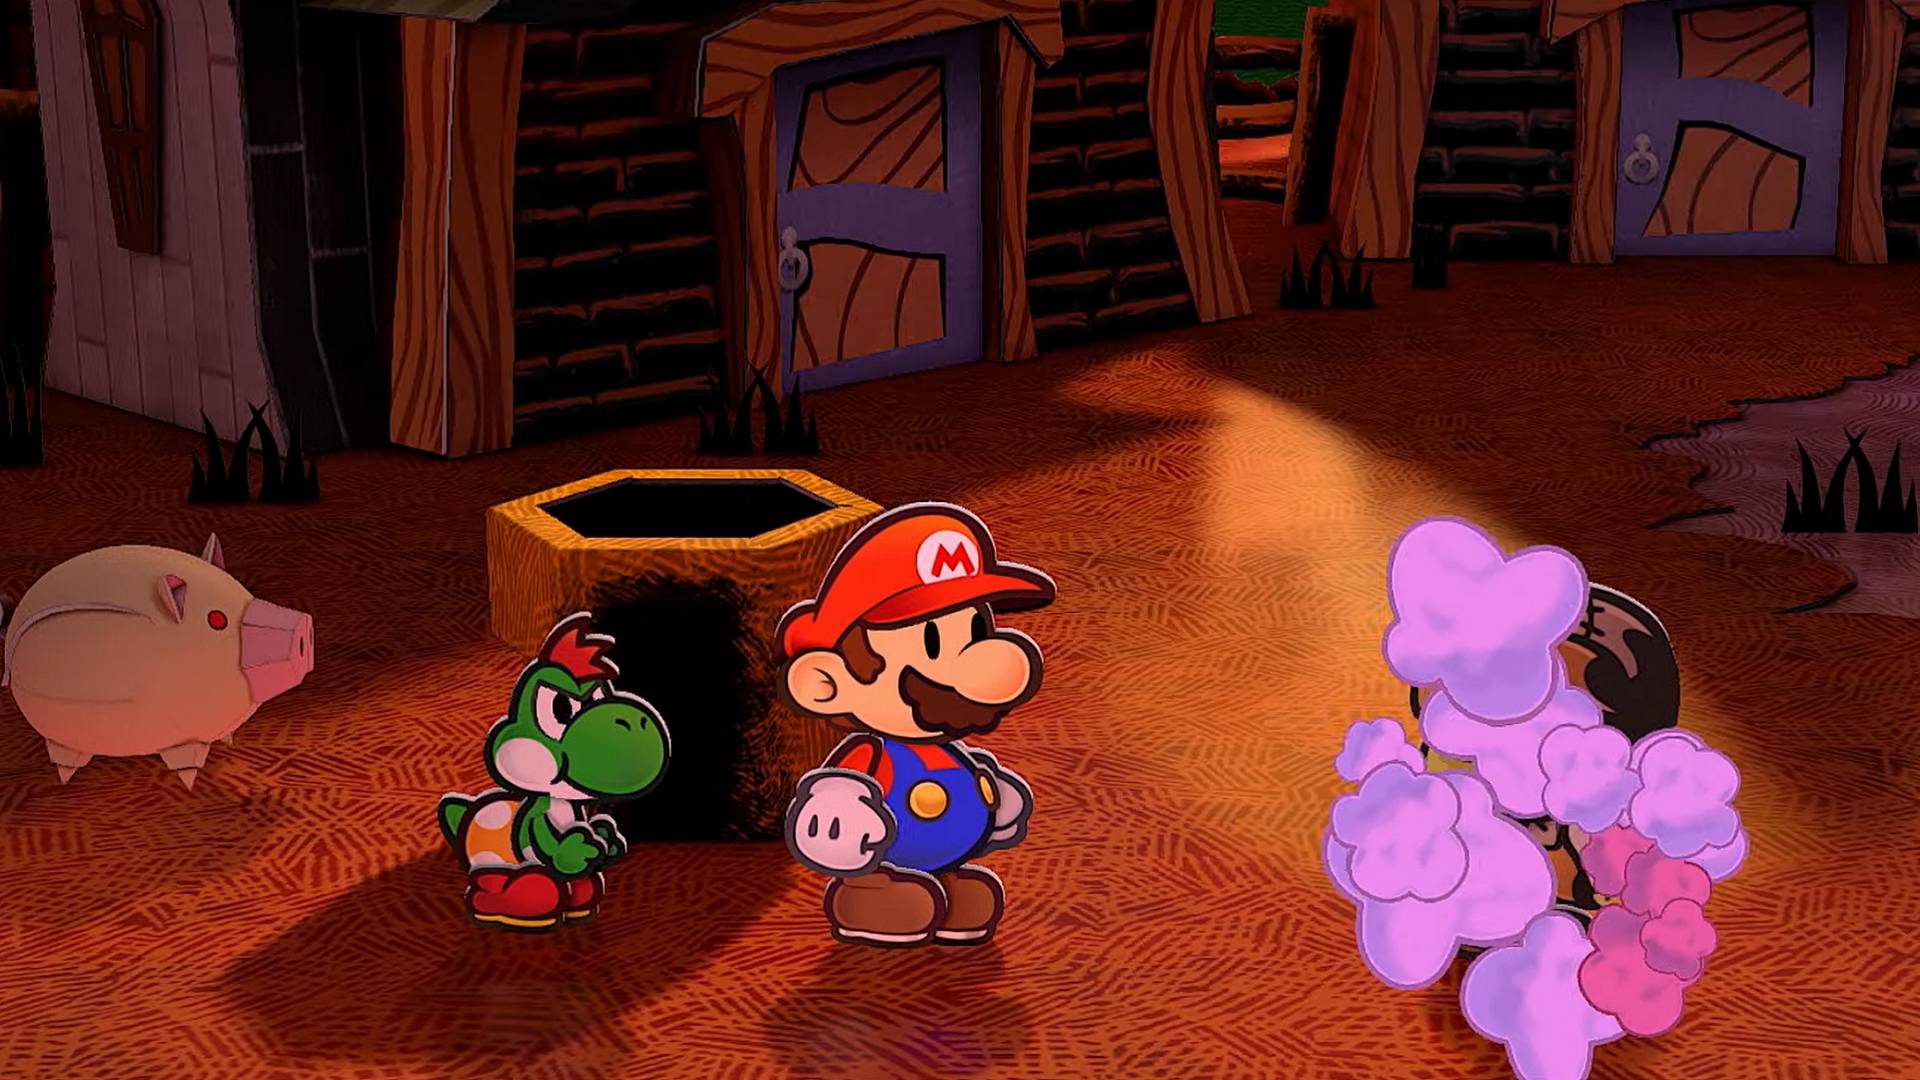 Paper Mario: The Thousand-Year Door release date speculation